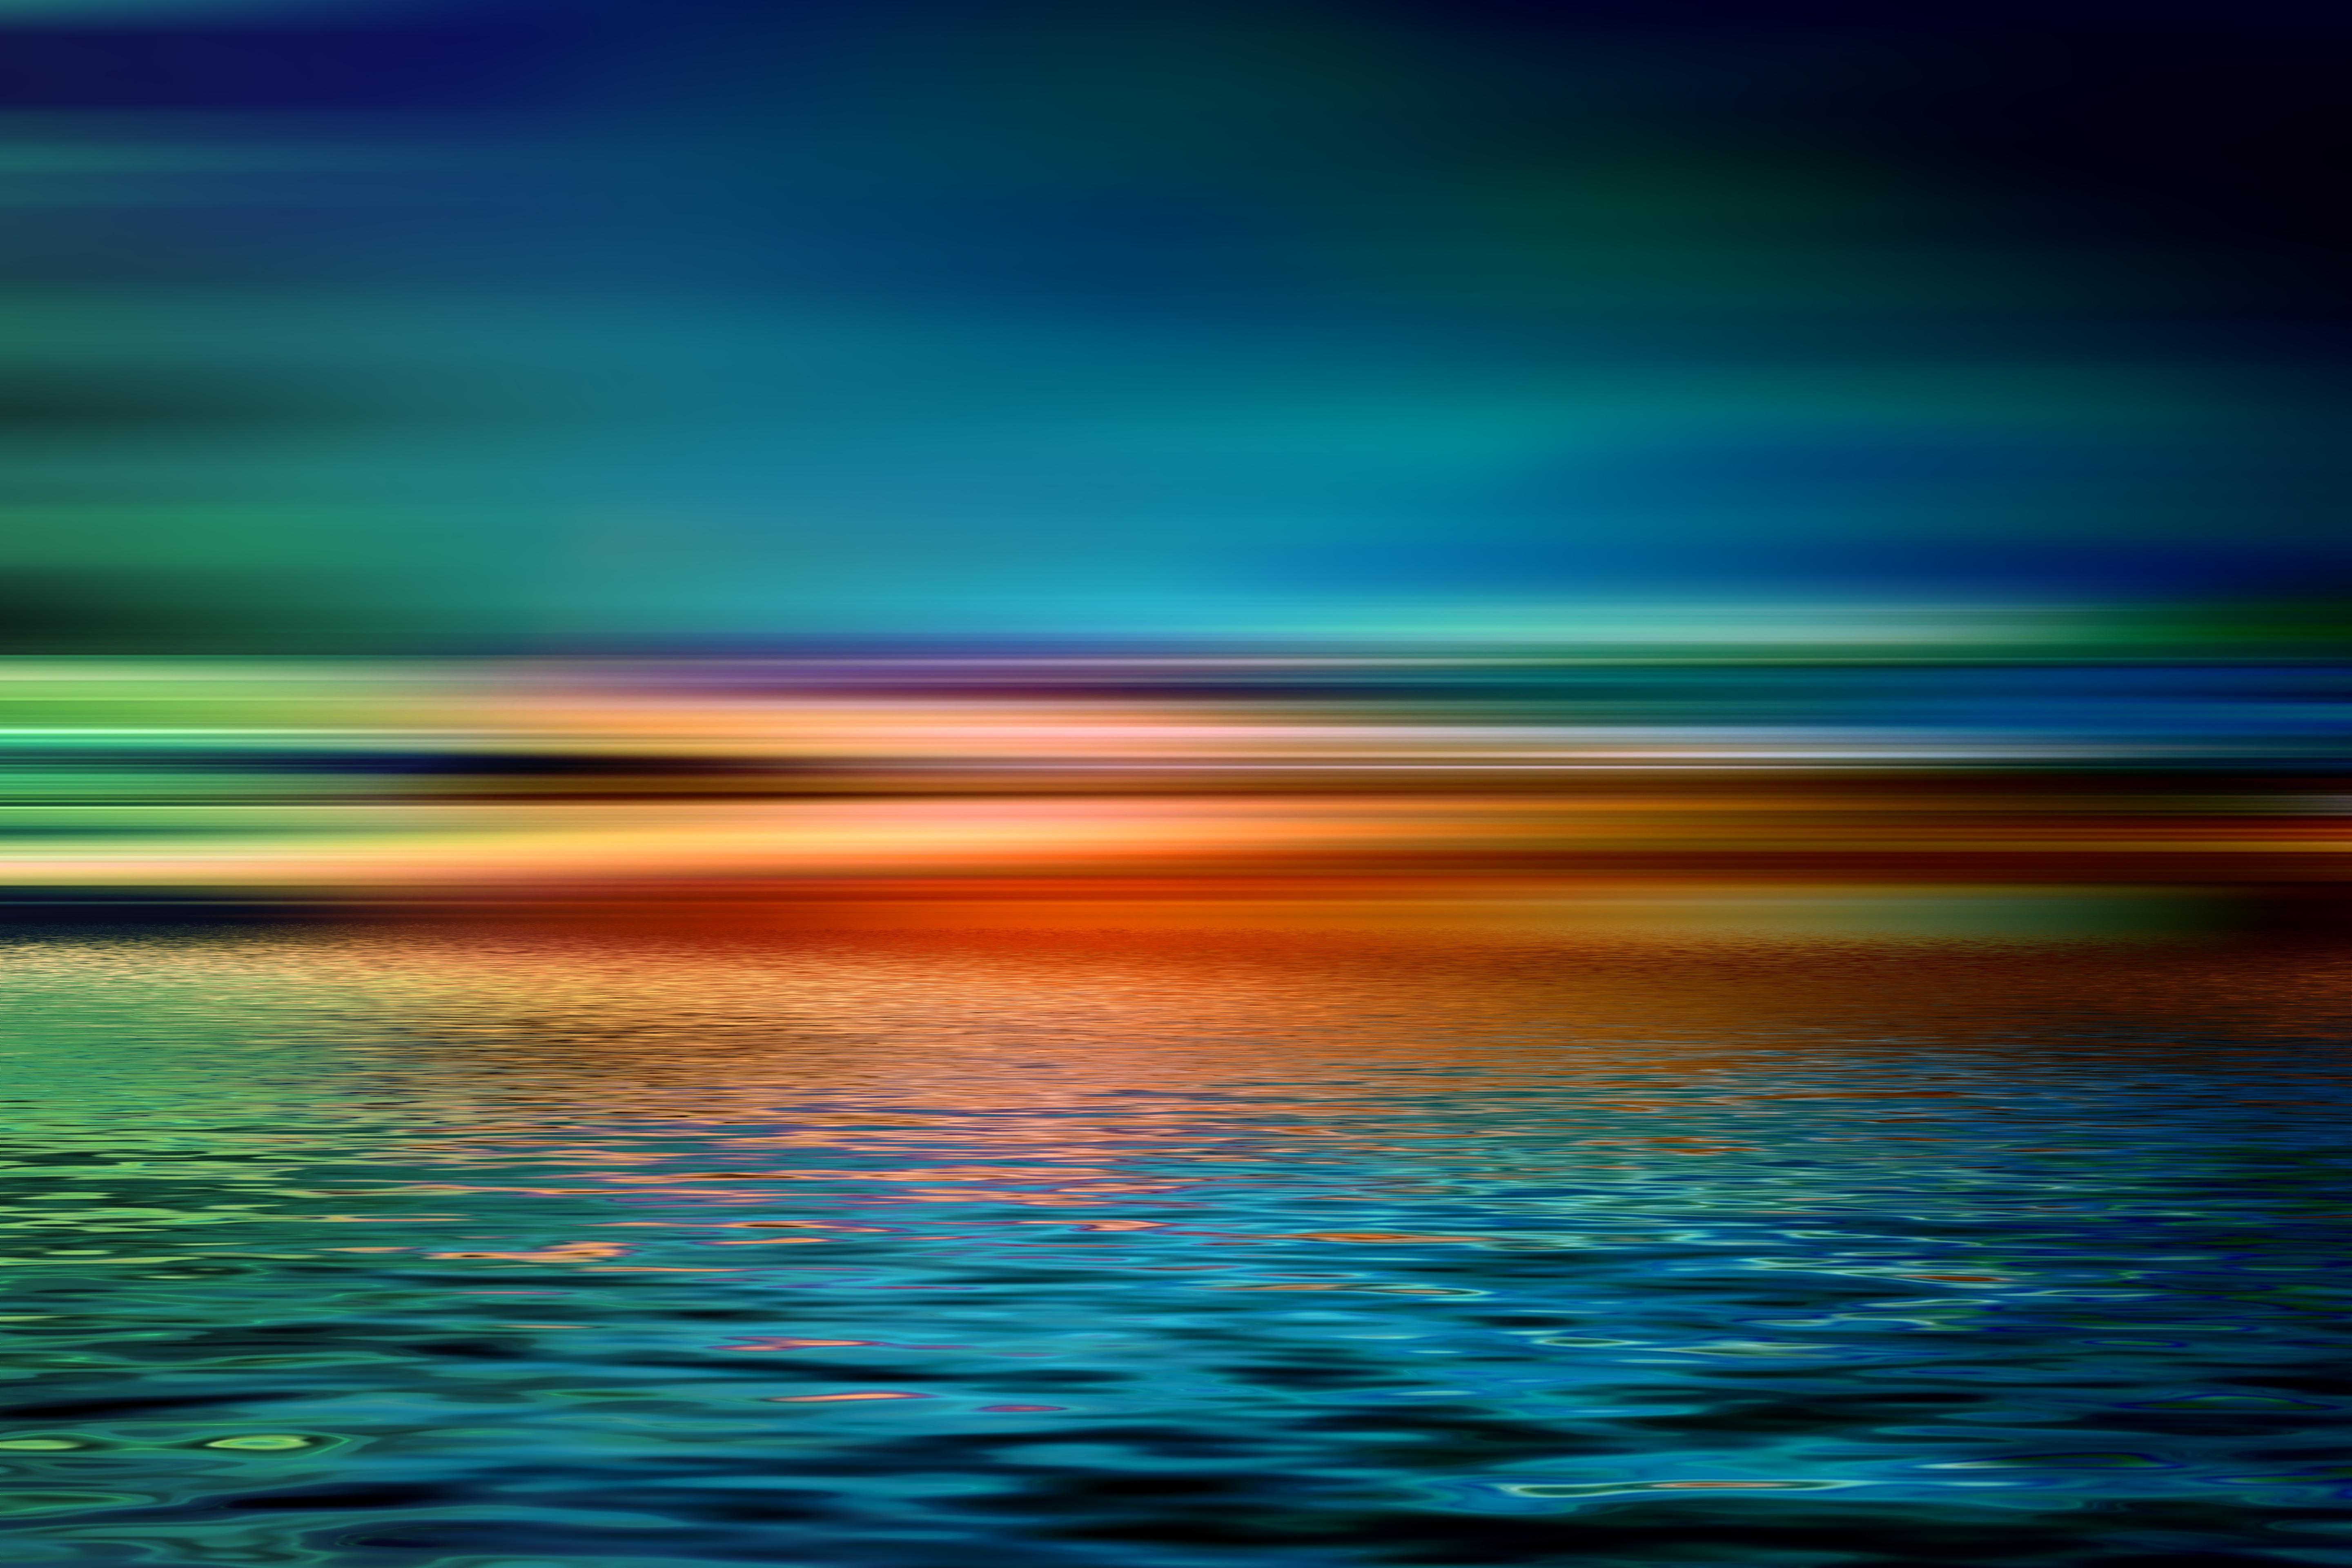 Colorful Artistic Sunset over Water, HD Artist, 4k Wallpaper